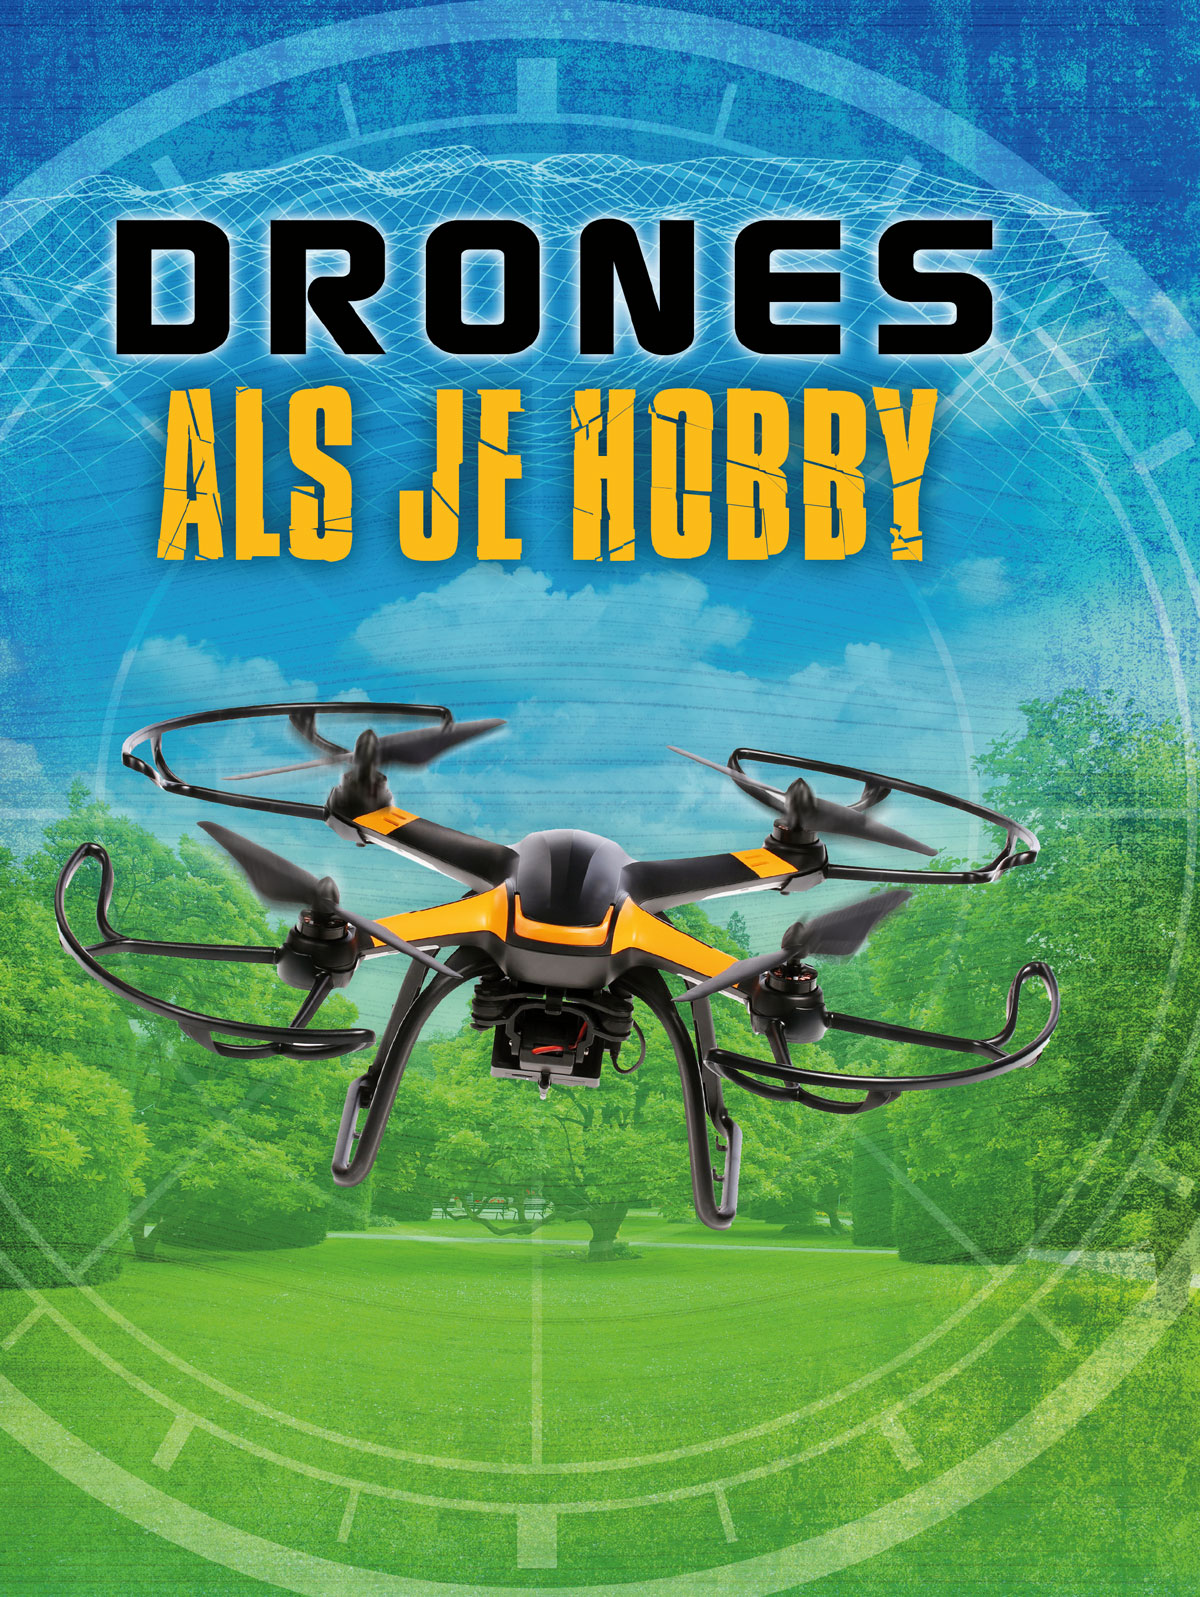 CNBDRO001 Drones als je hobby